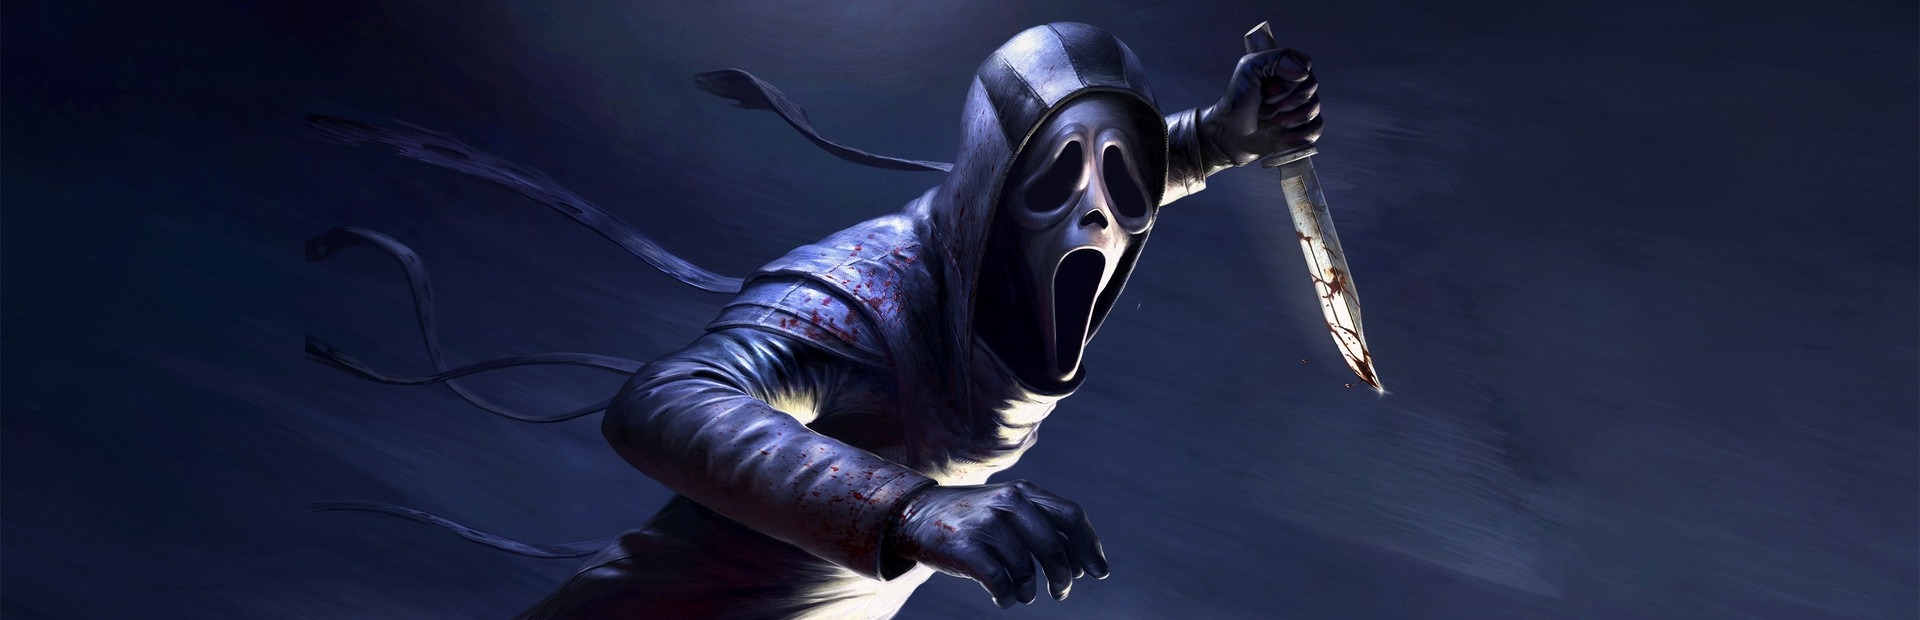 Banner Dead by Daylight Deluxe Edition